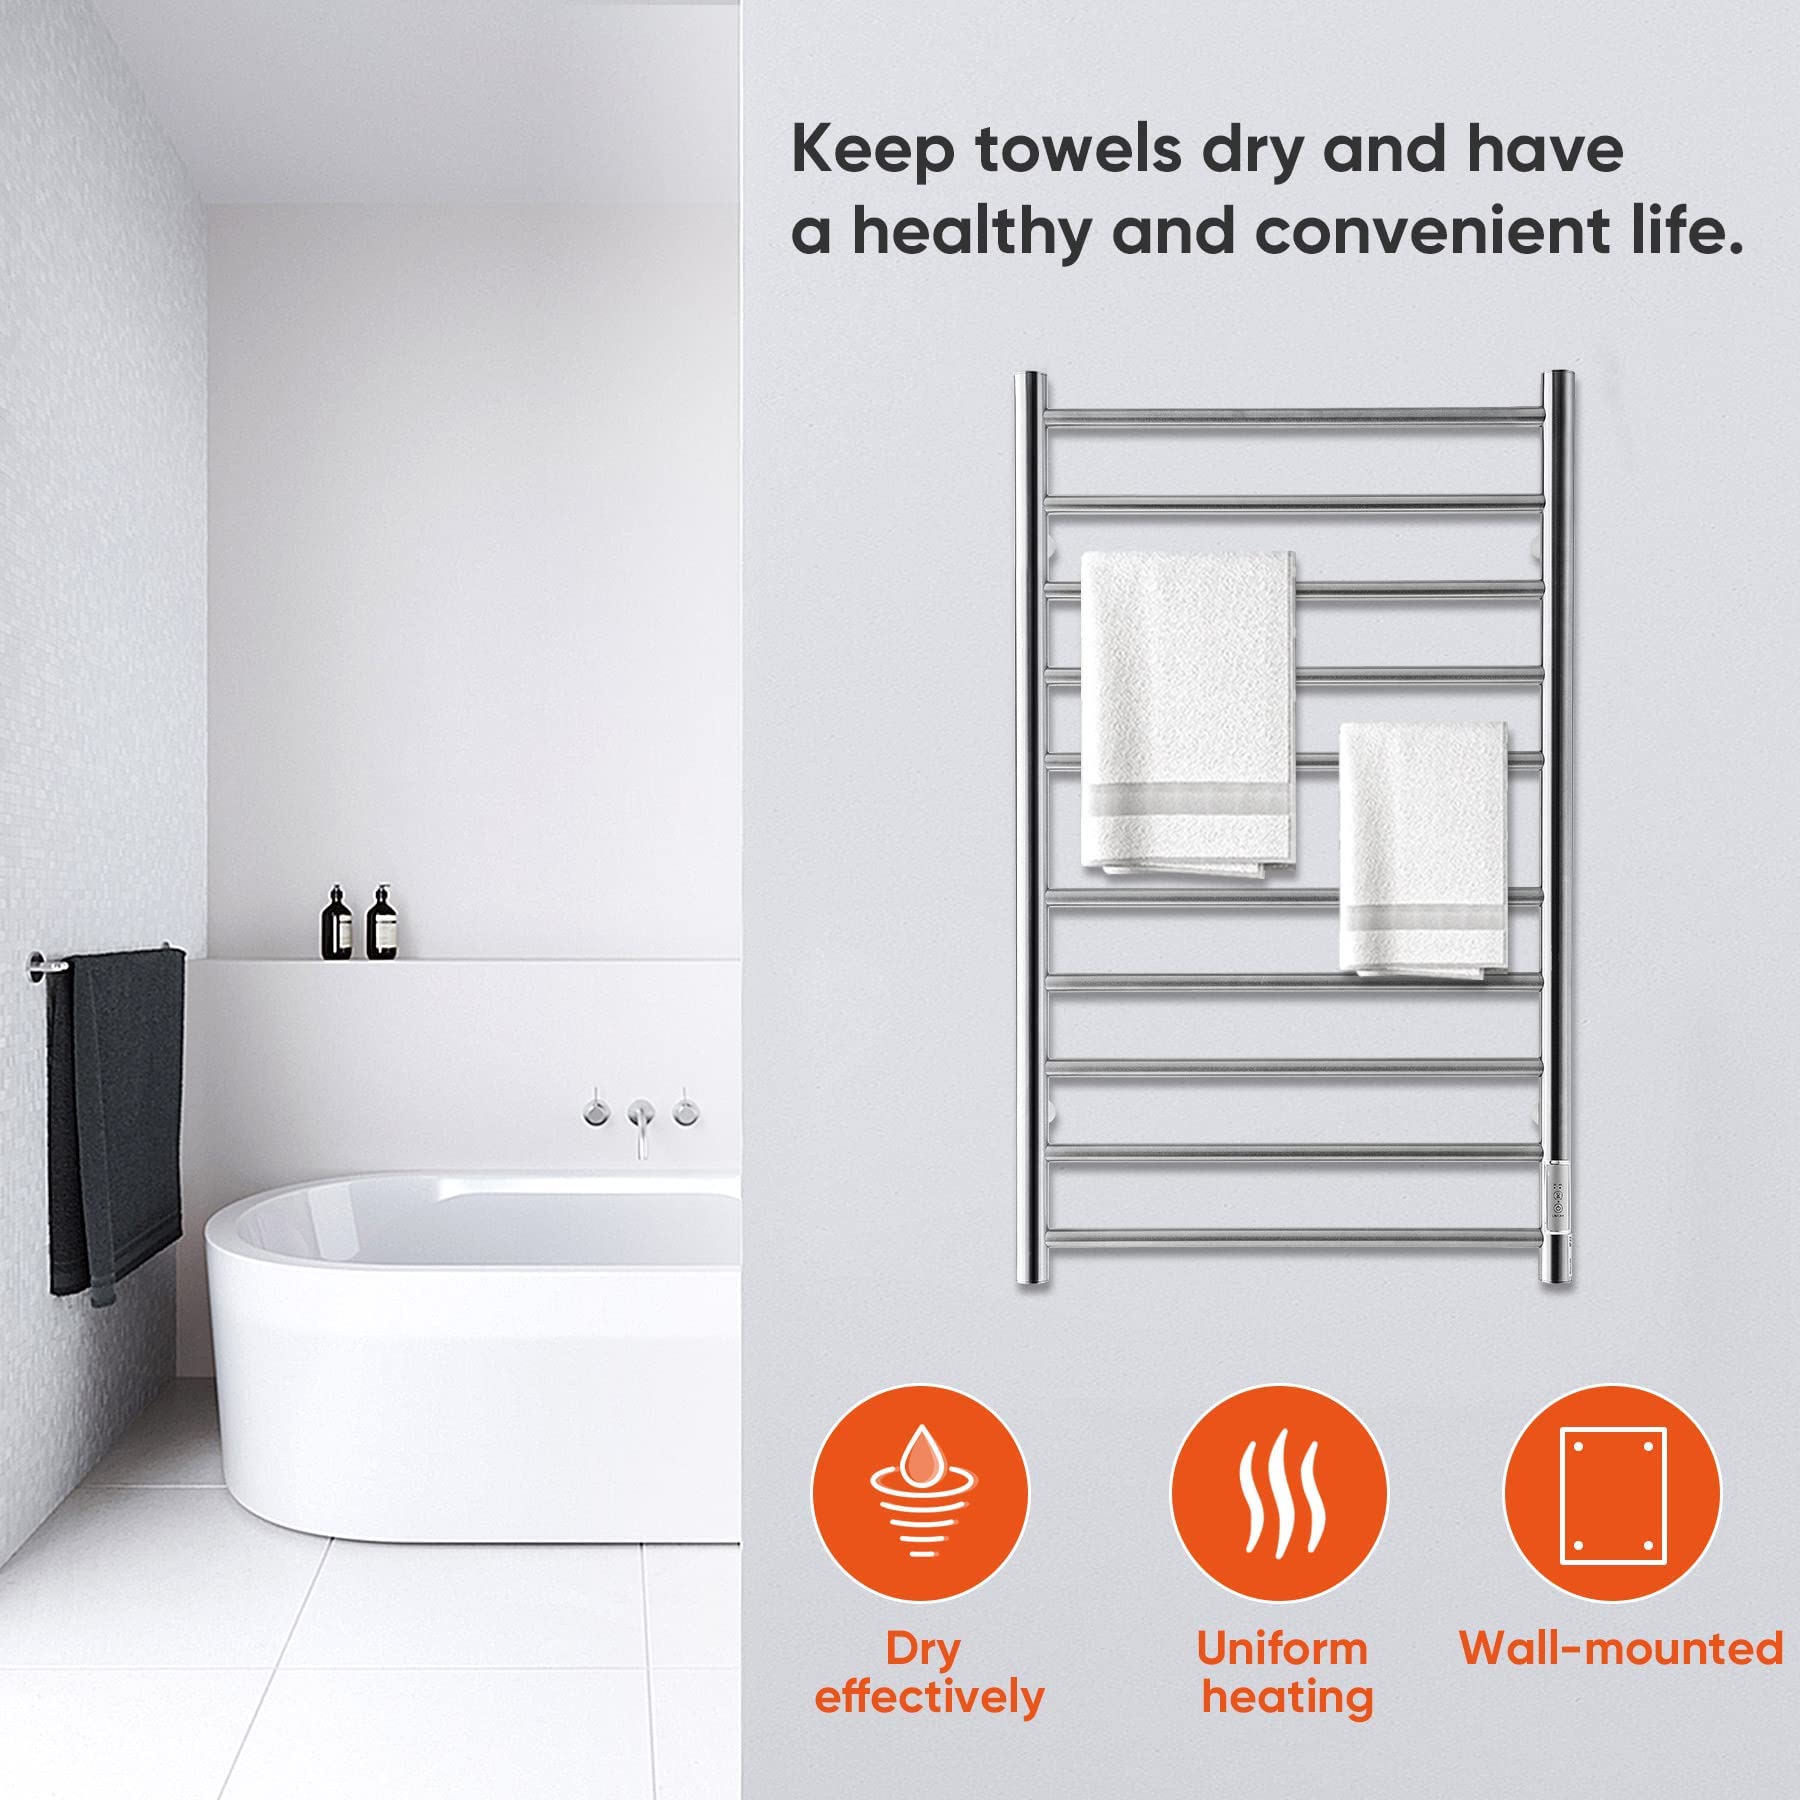 REECOO Towel Warmer Wall-Mounted Electric Towel Racks for Bathroom with Timer, Plug-in and Hardwired Options 24H Thermostatic Stainless Steel Drying Heated Towel Rack Suitable for Homes, Hotels